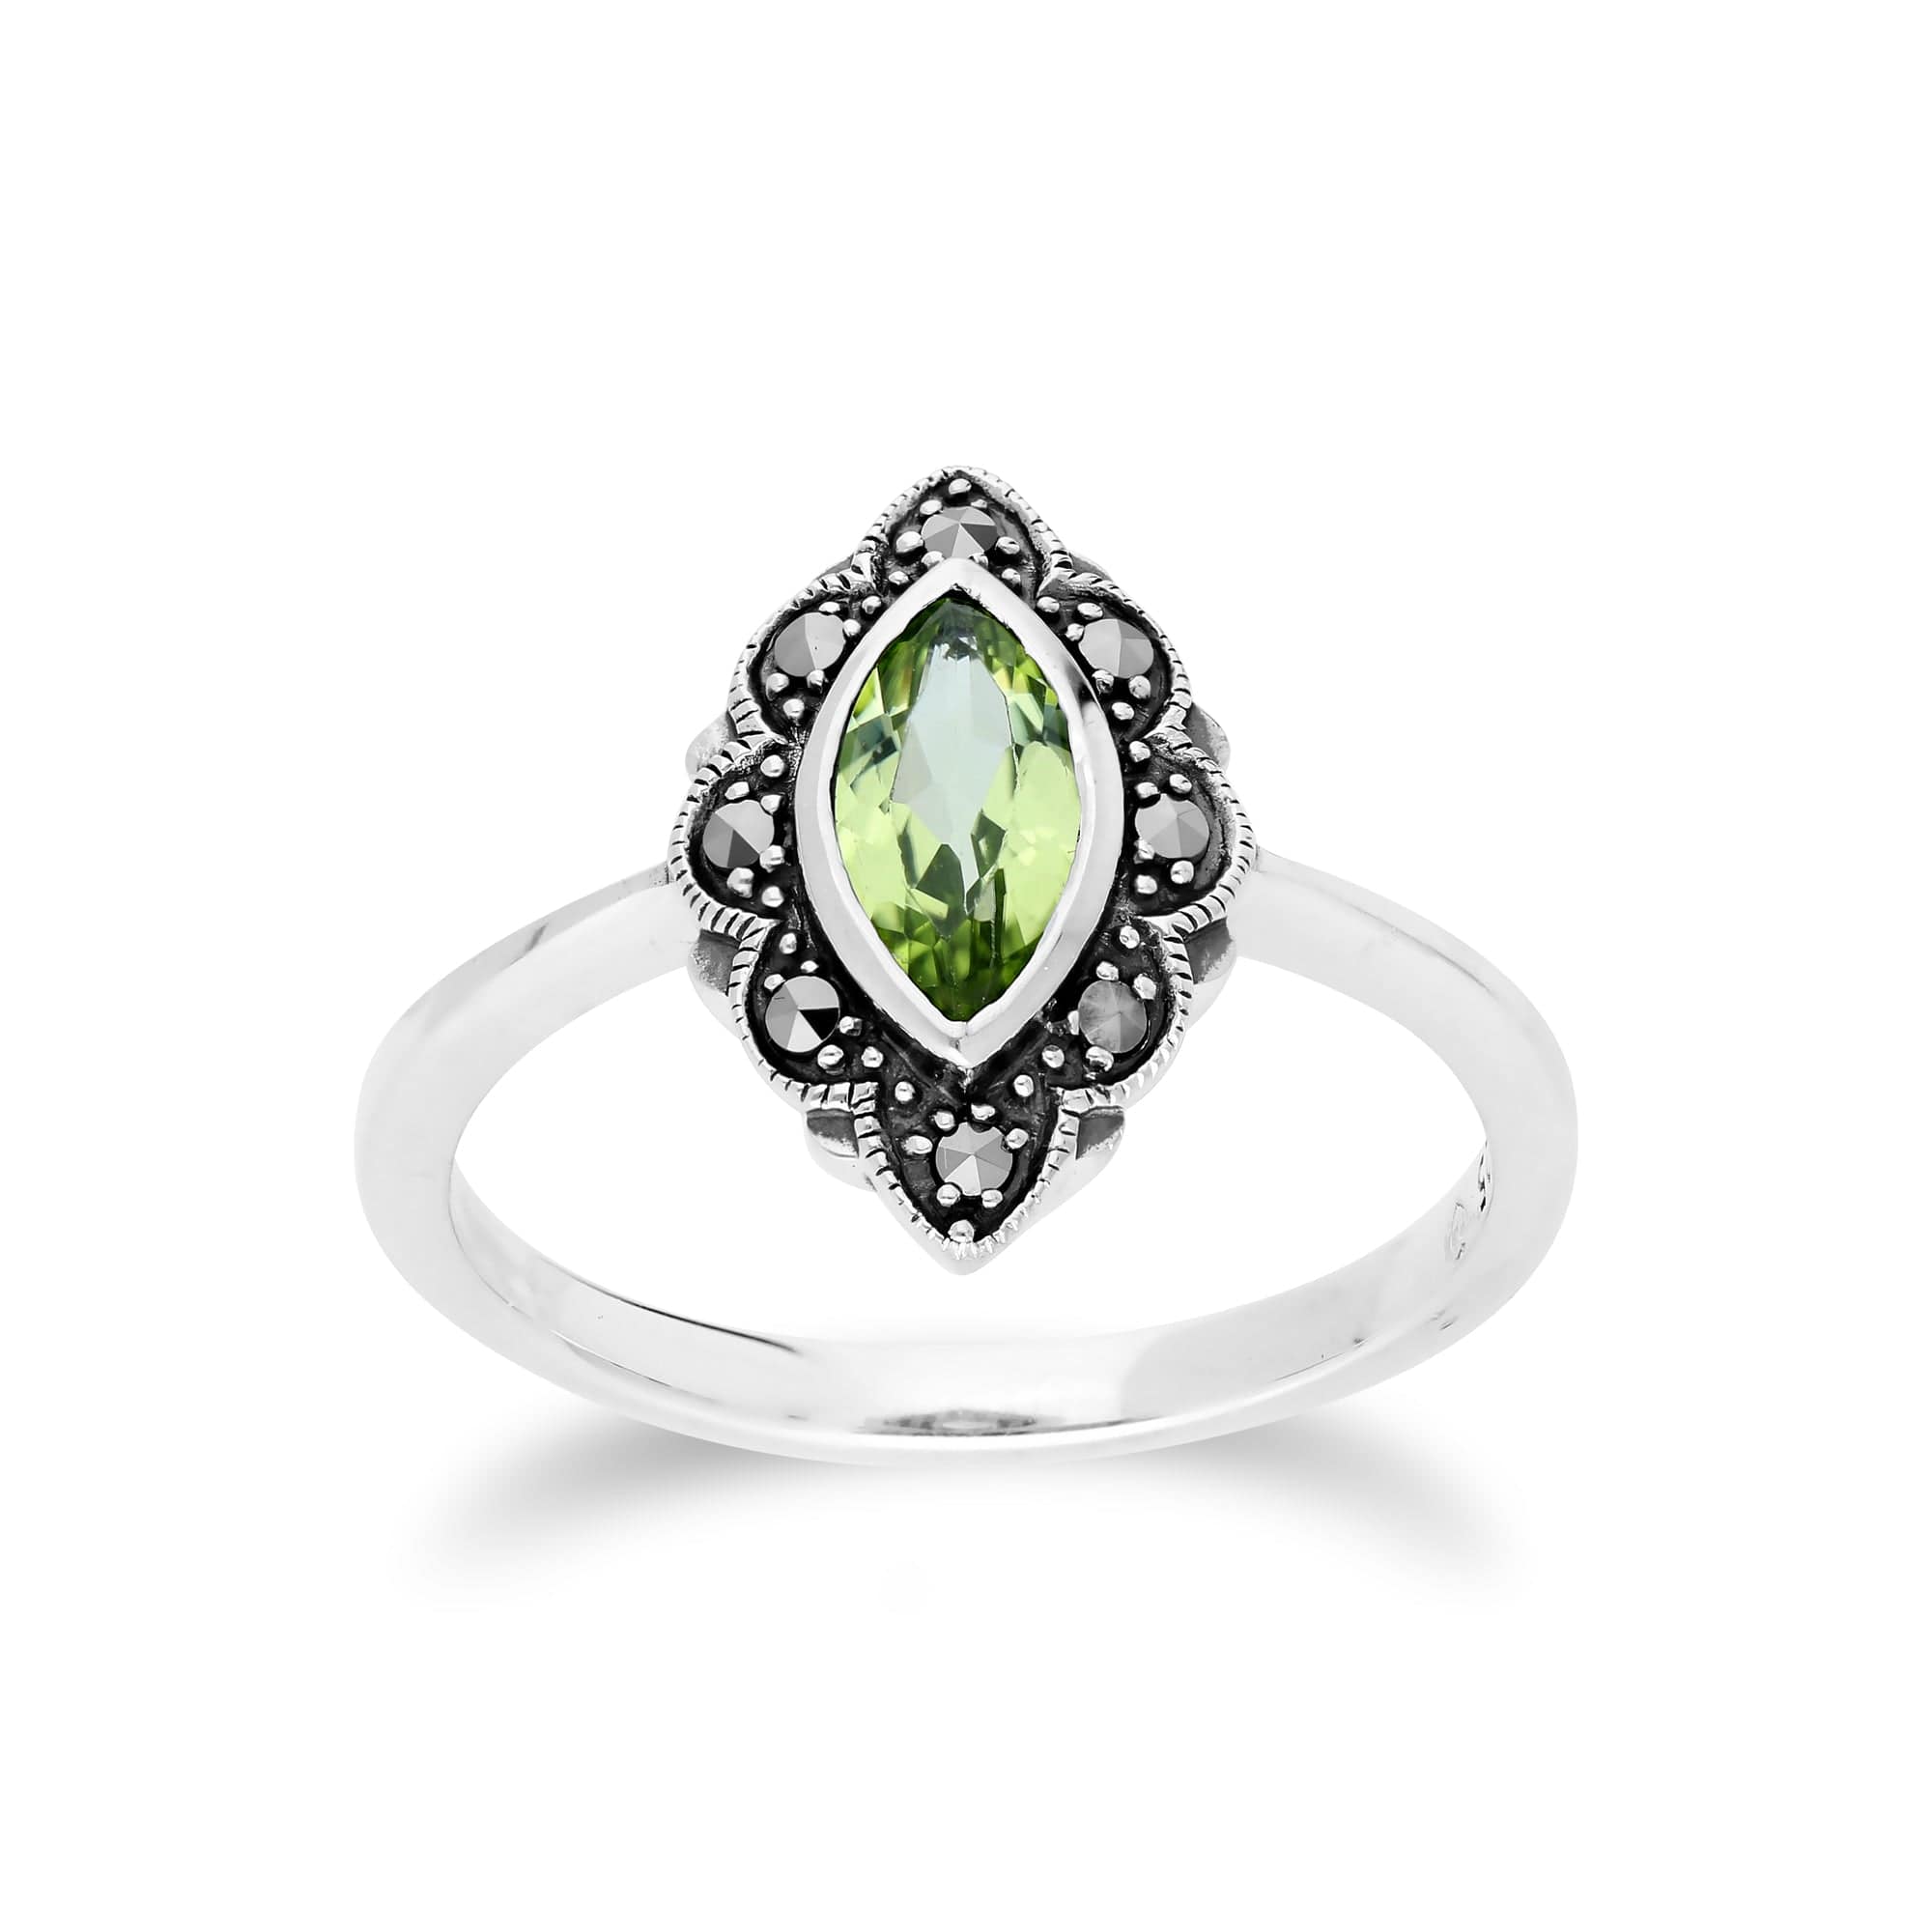 214R597203925 Art Nouveau  Marquise Peridot & Marcasite Leaf Ring in 925 Sterling Silver 1